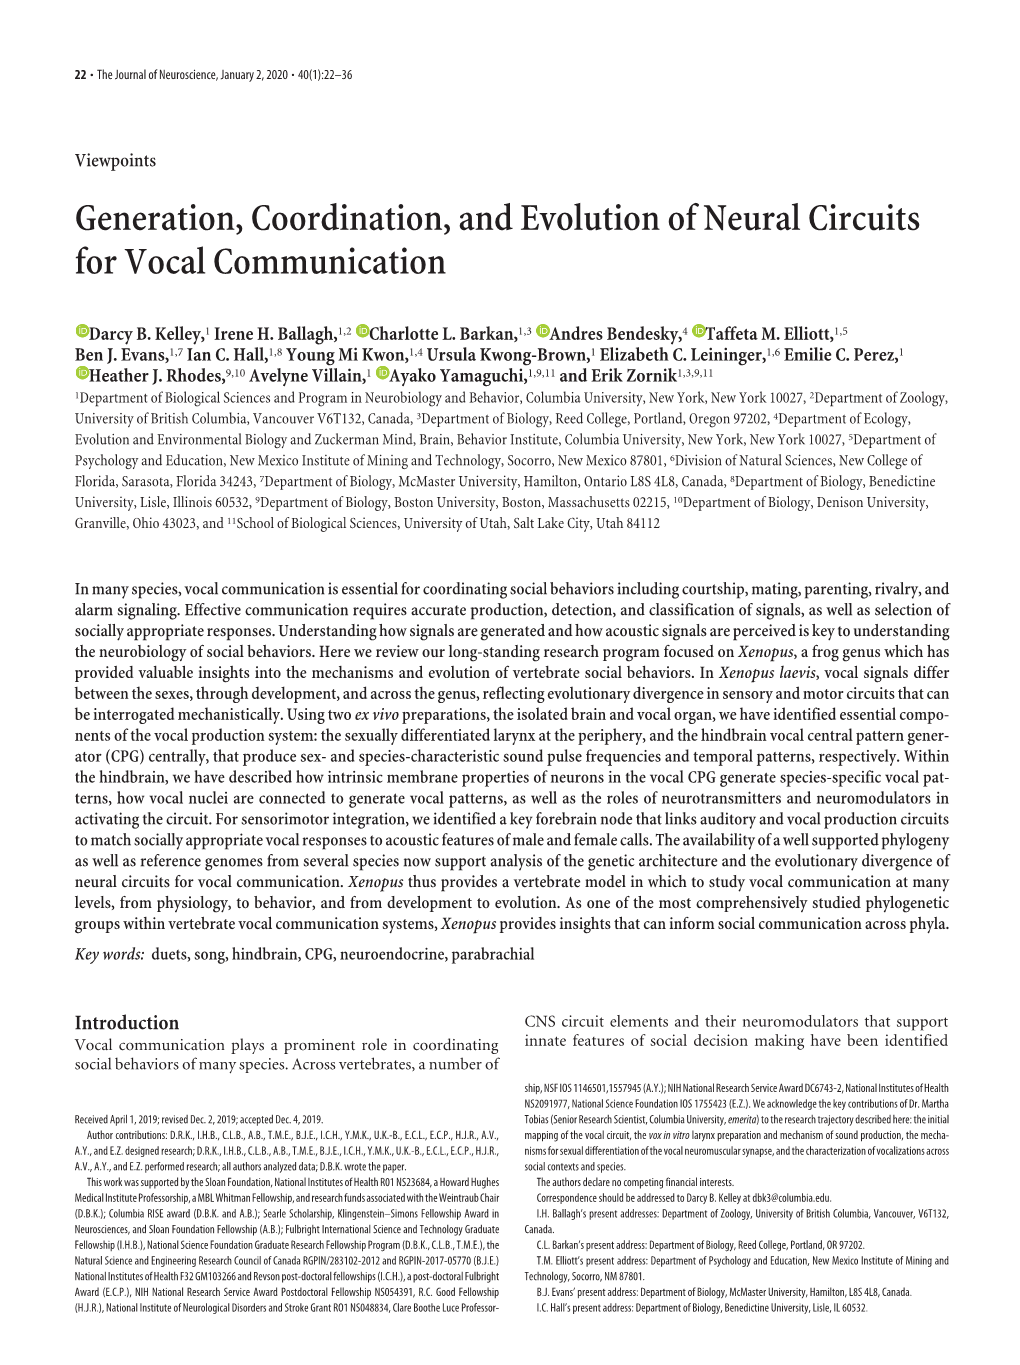 Generation, Coordination, and Evolution of Neural Circuits for Vocal Communication